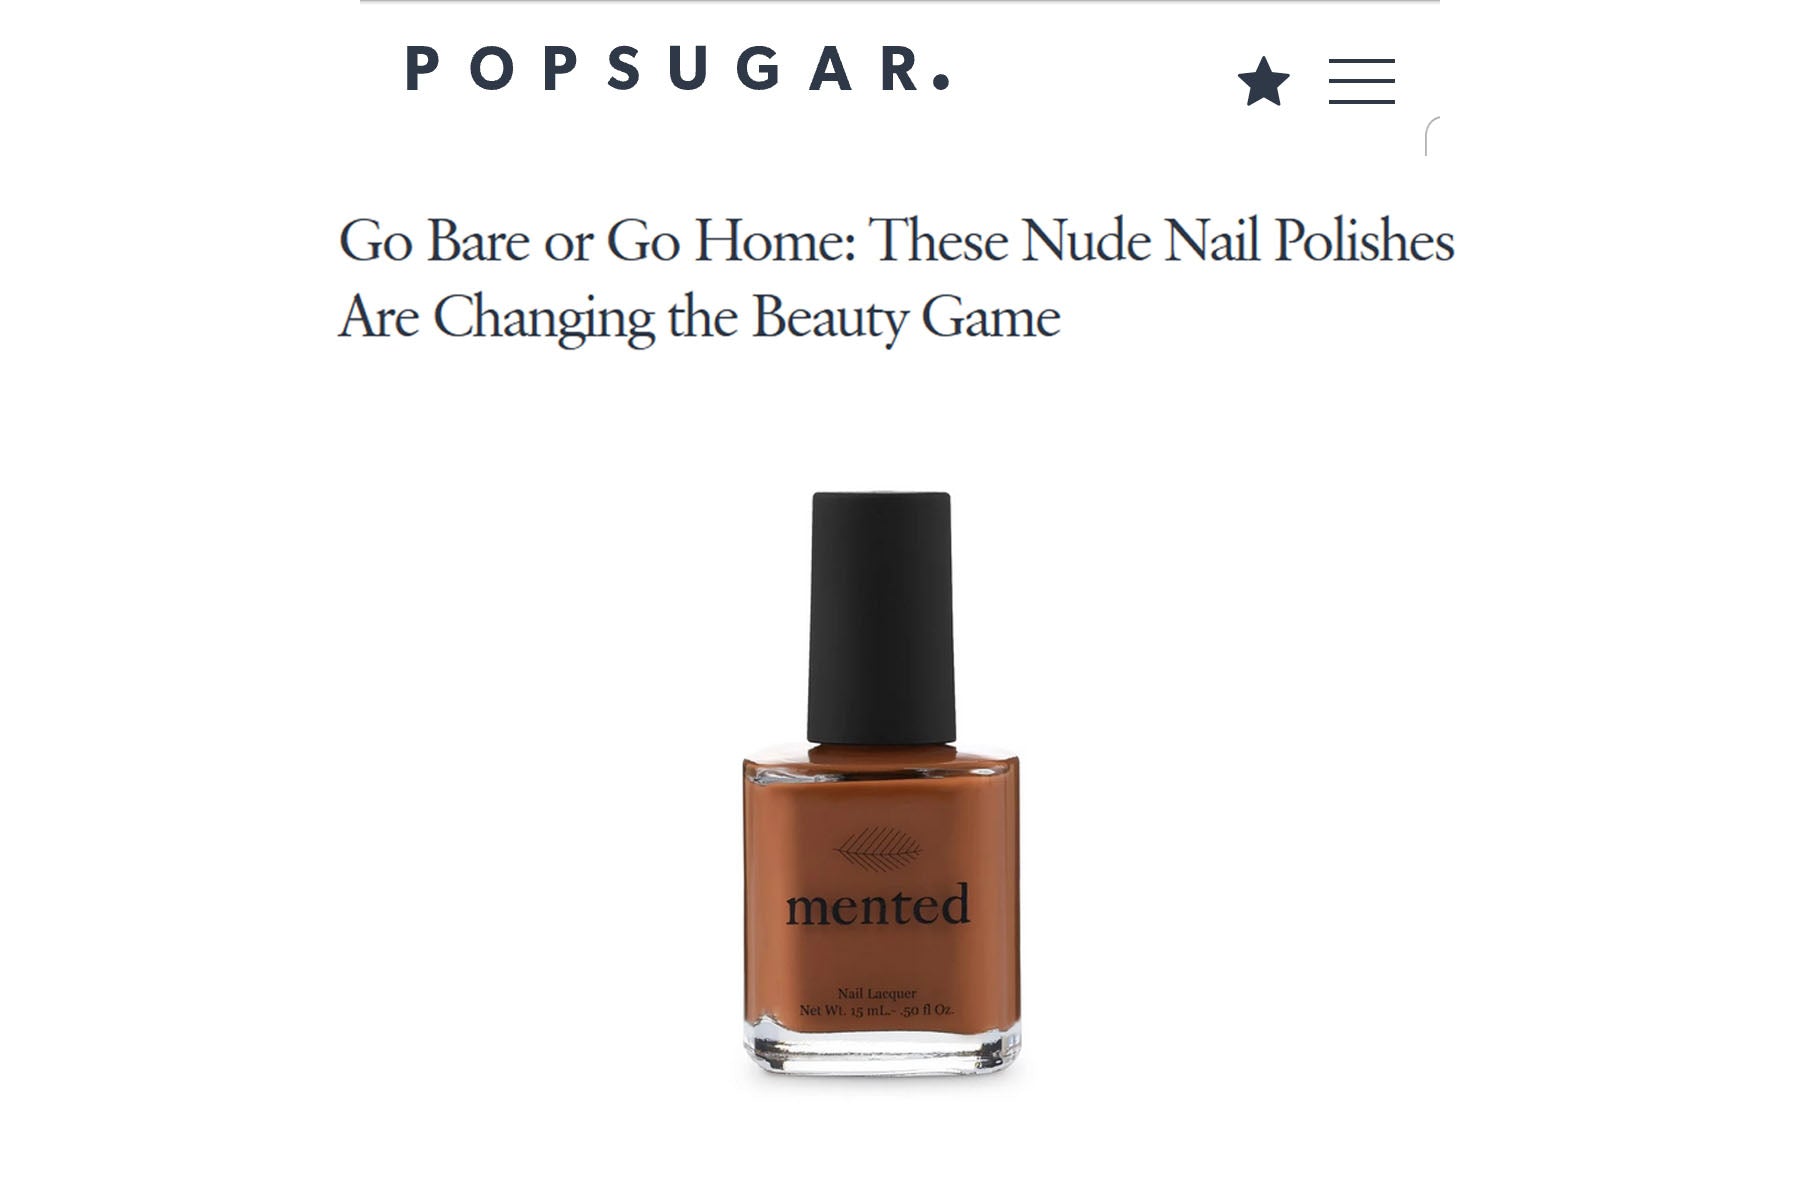 Go Bare or Go Home: These Nude Nail Polishes Are Changing the Beauty Game